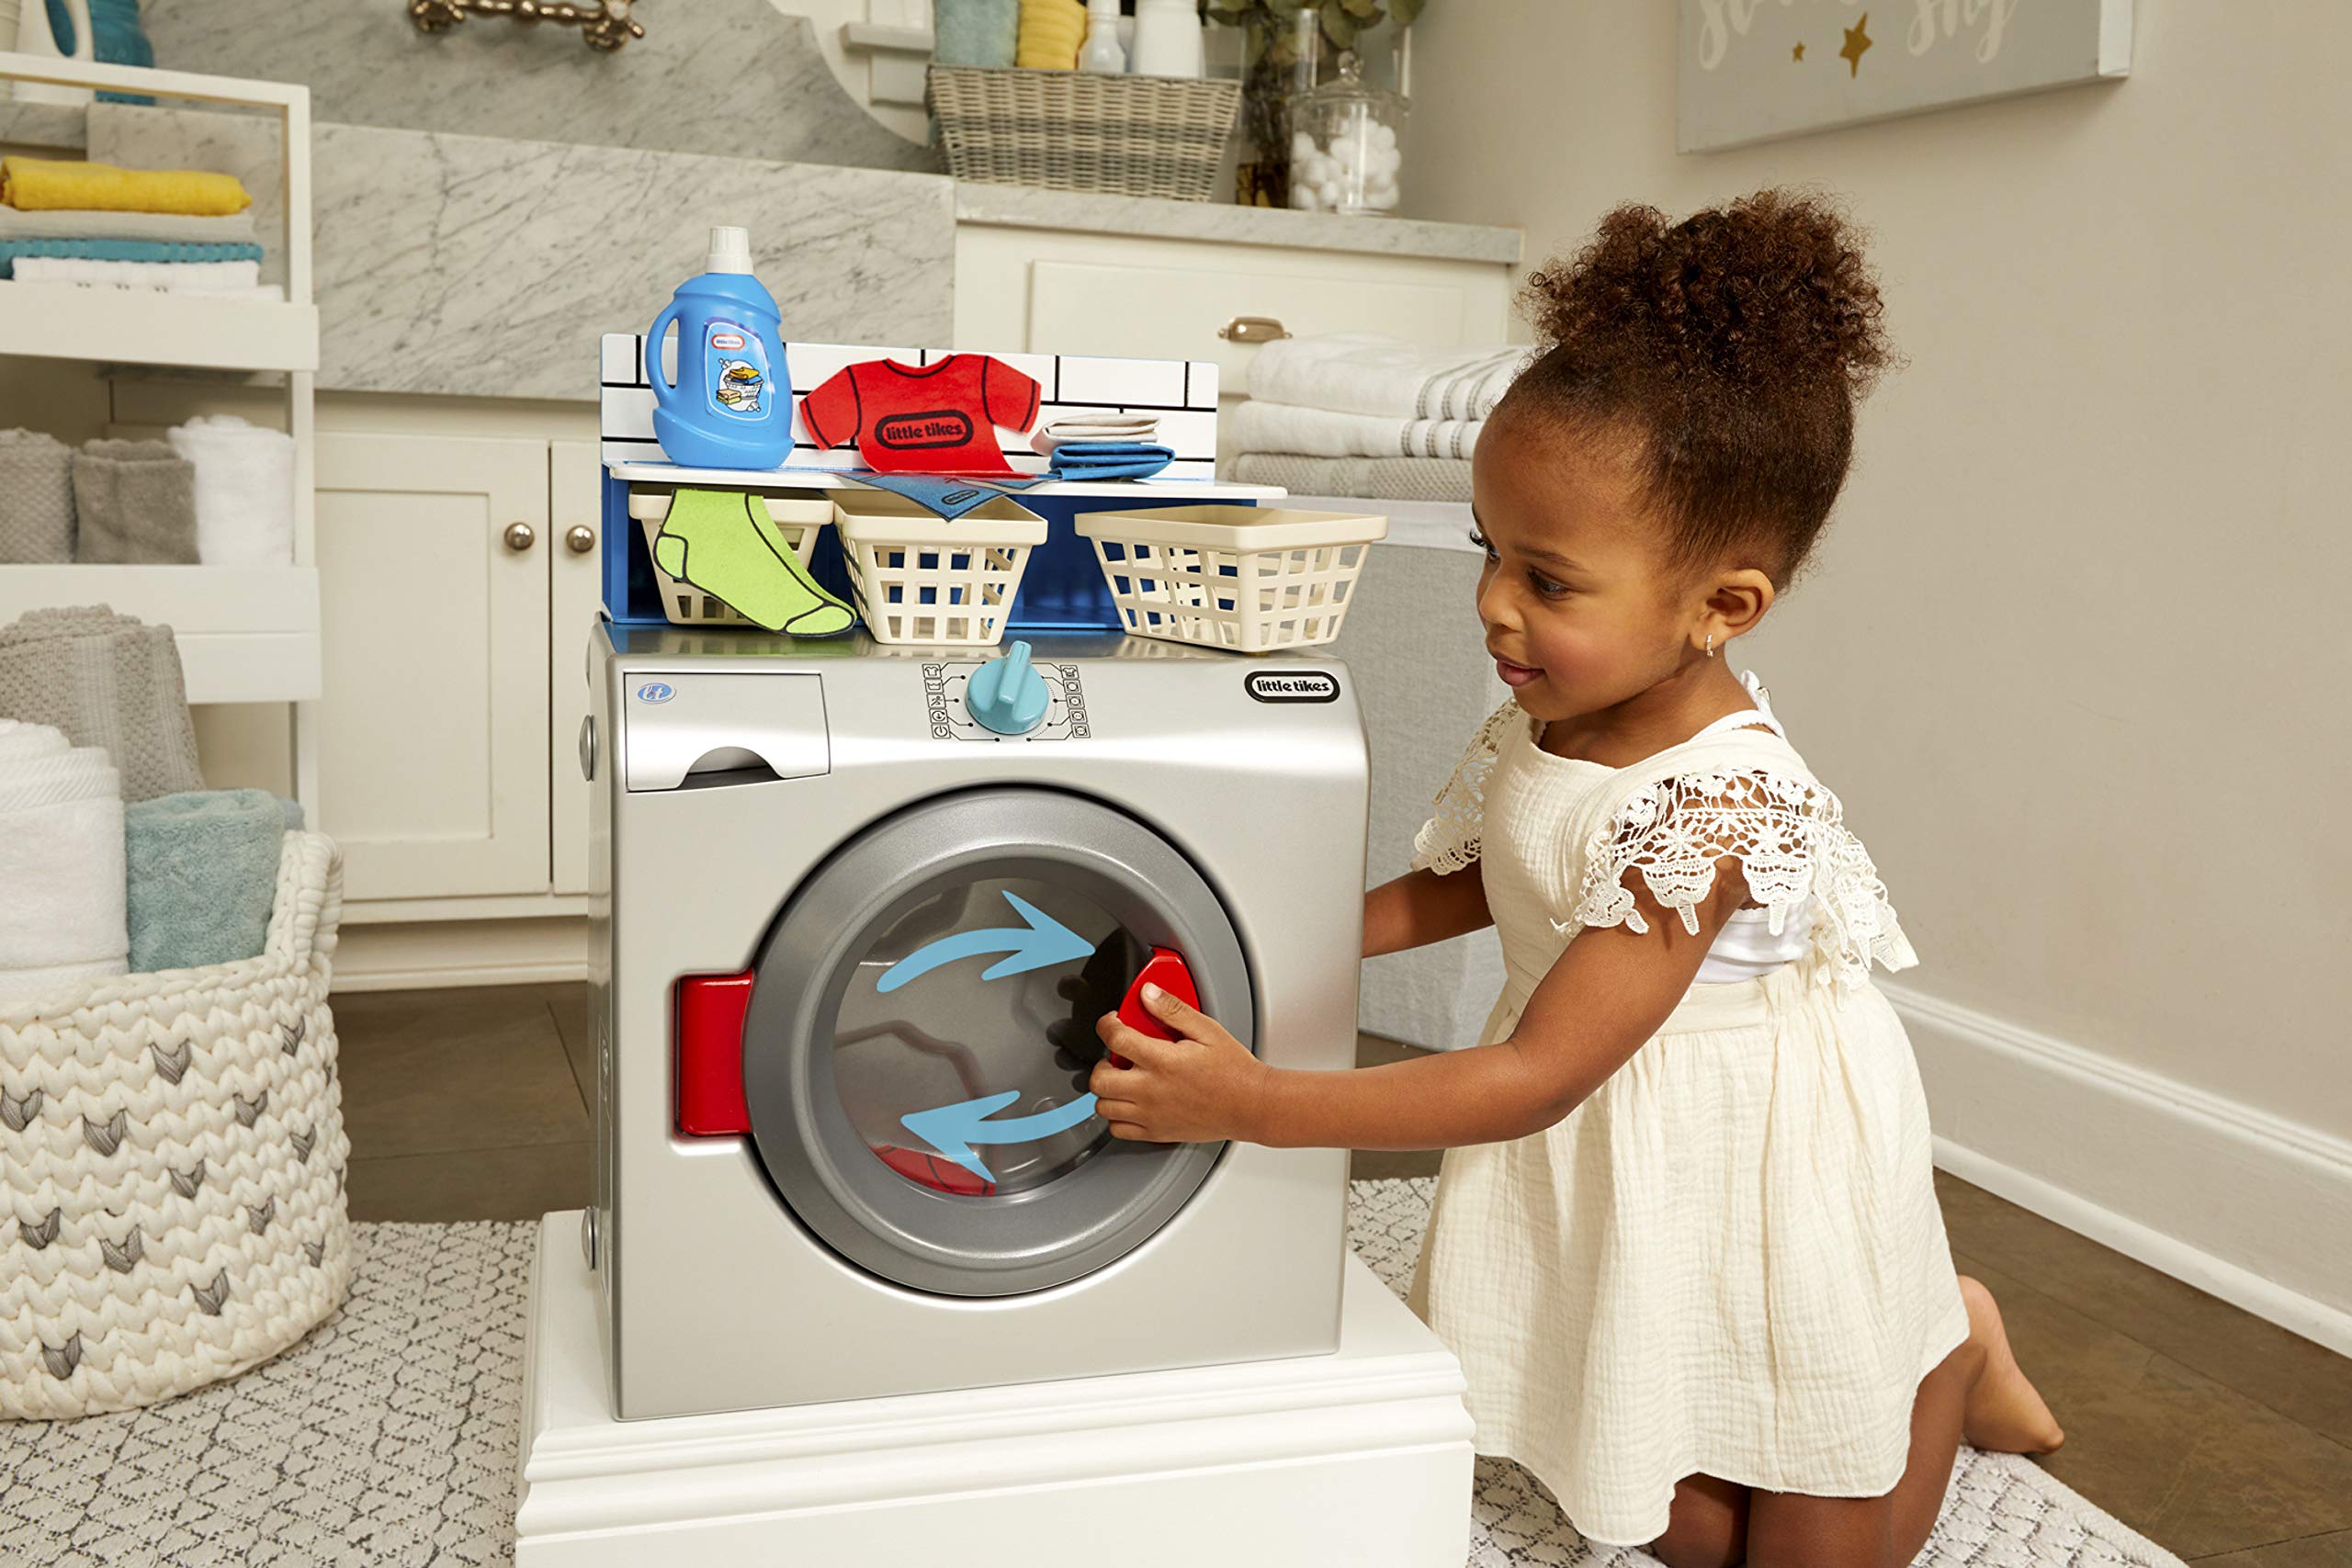 Little Tikes First Washer Dryer - Realistic Pretend Play Appliance for Kids, Interactive Toy Washing Machine with 11 Laundry Accessories, Unique Toy, Ages 2+